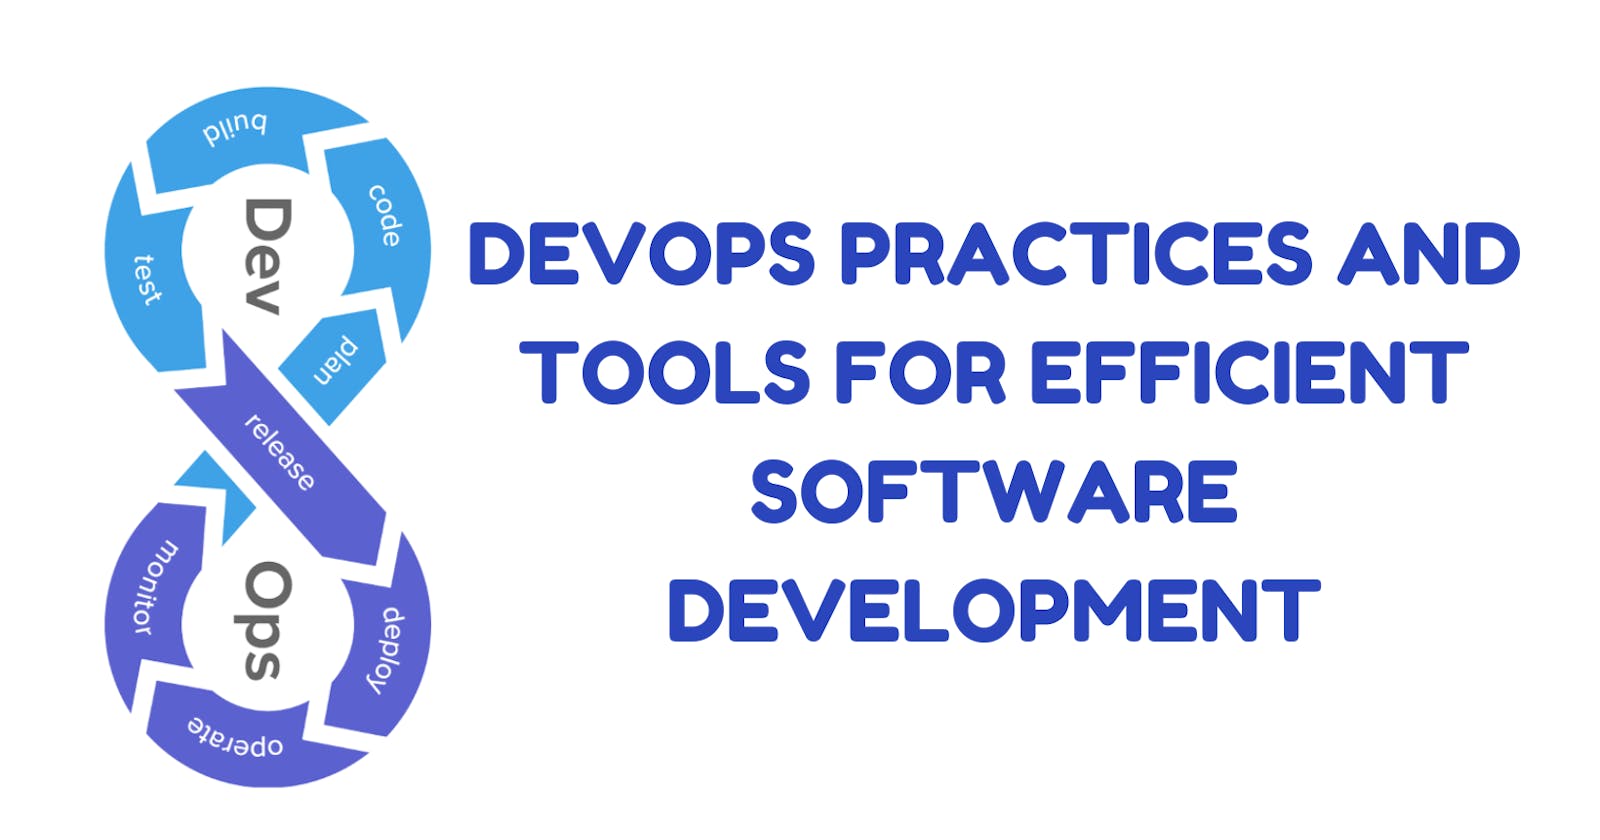 DevOps Practices and Tools for Efficient Software Development